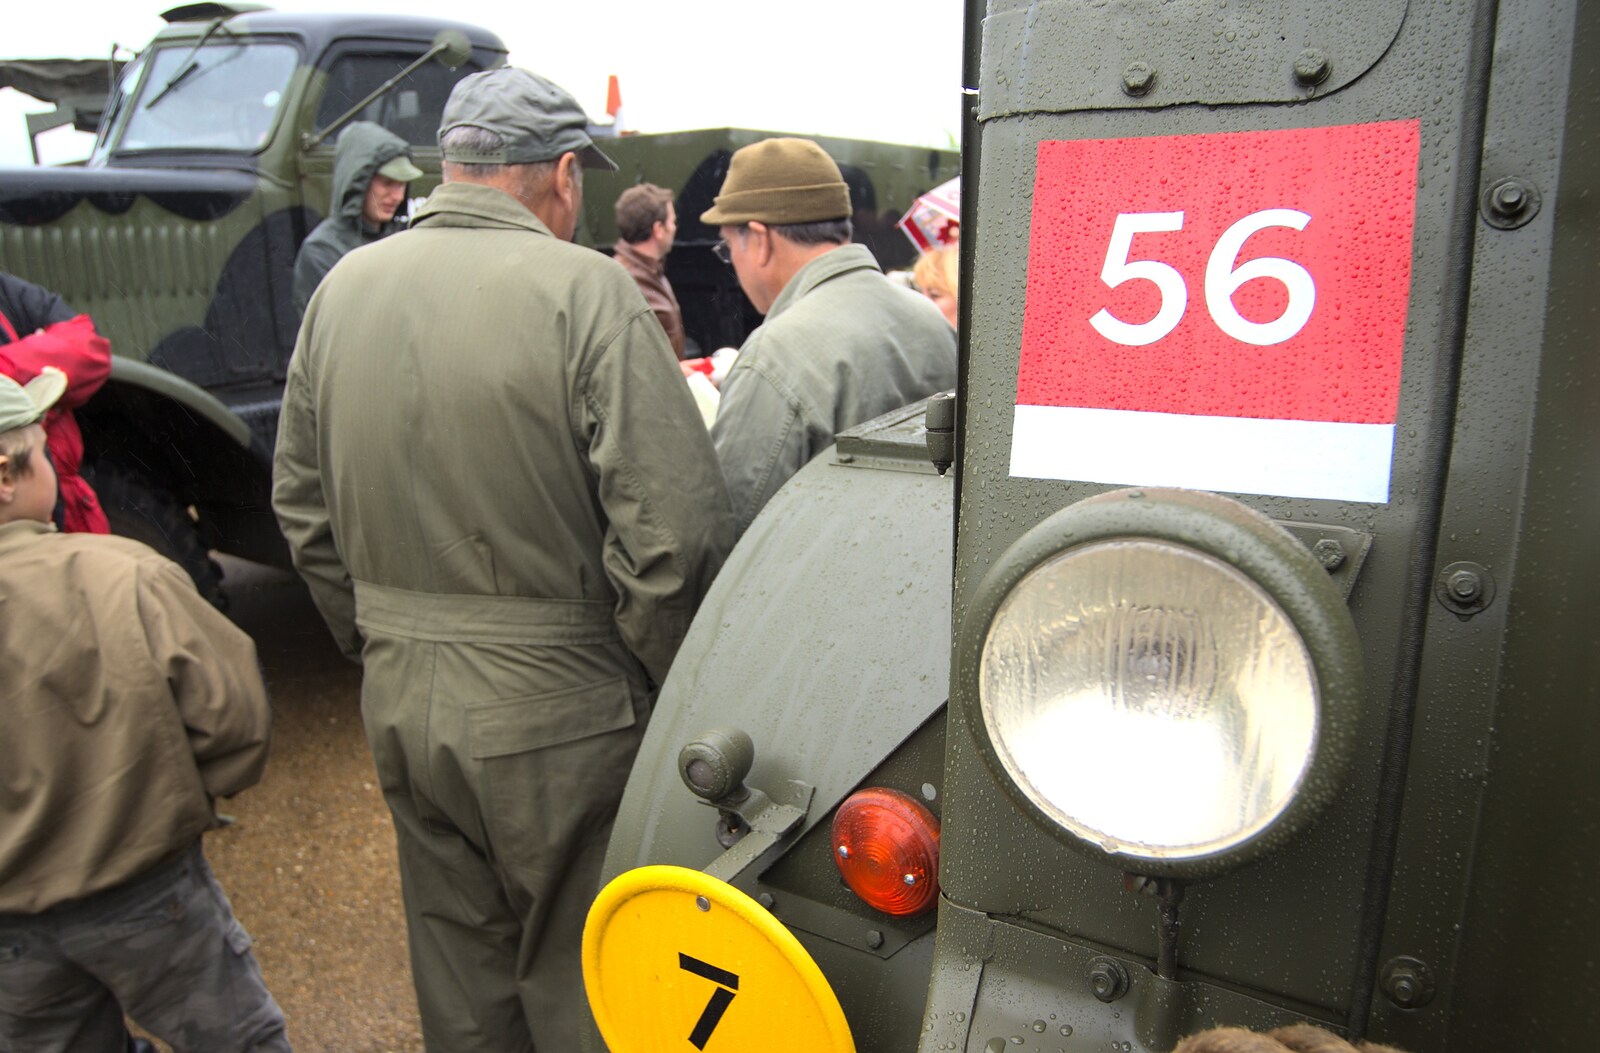 Headlight close-up as Clive gathers the troops from Clive's Military Vehicle Convoy, Brome Aerodrome, Suffolk - 16th July 2011